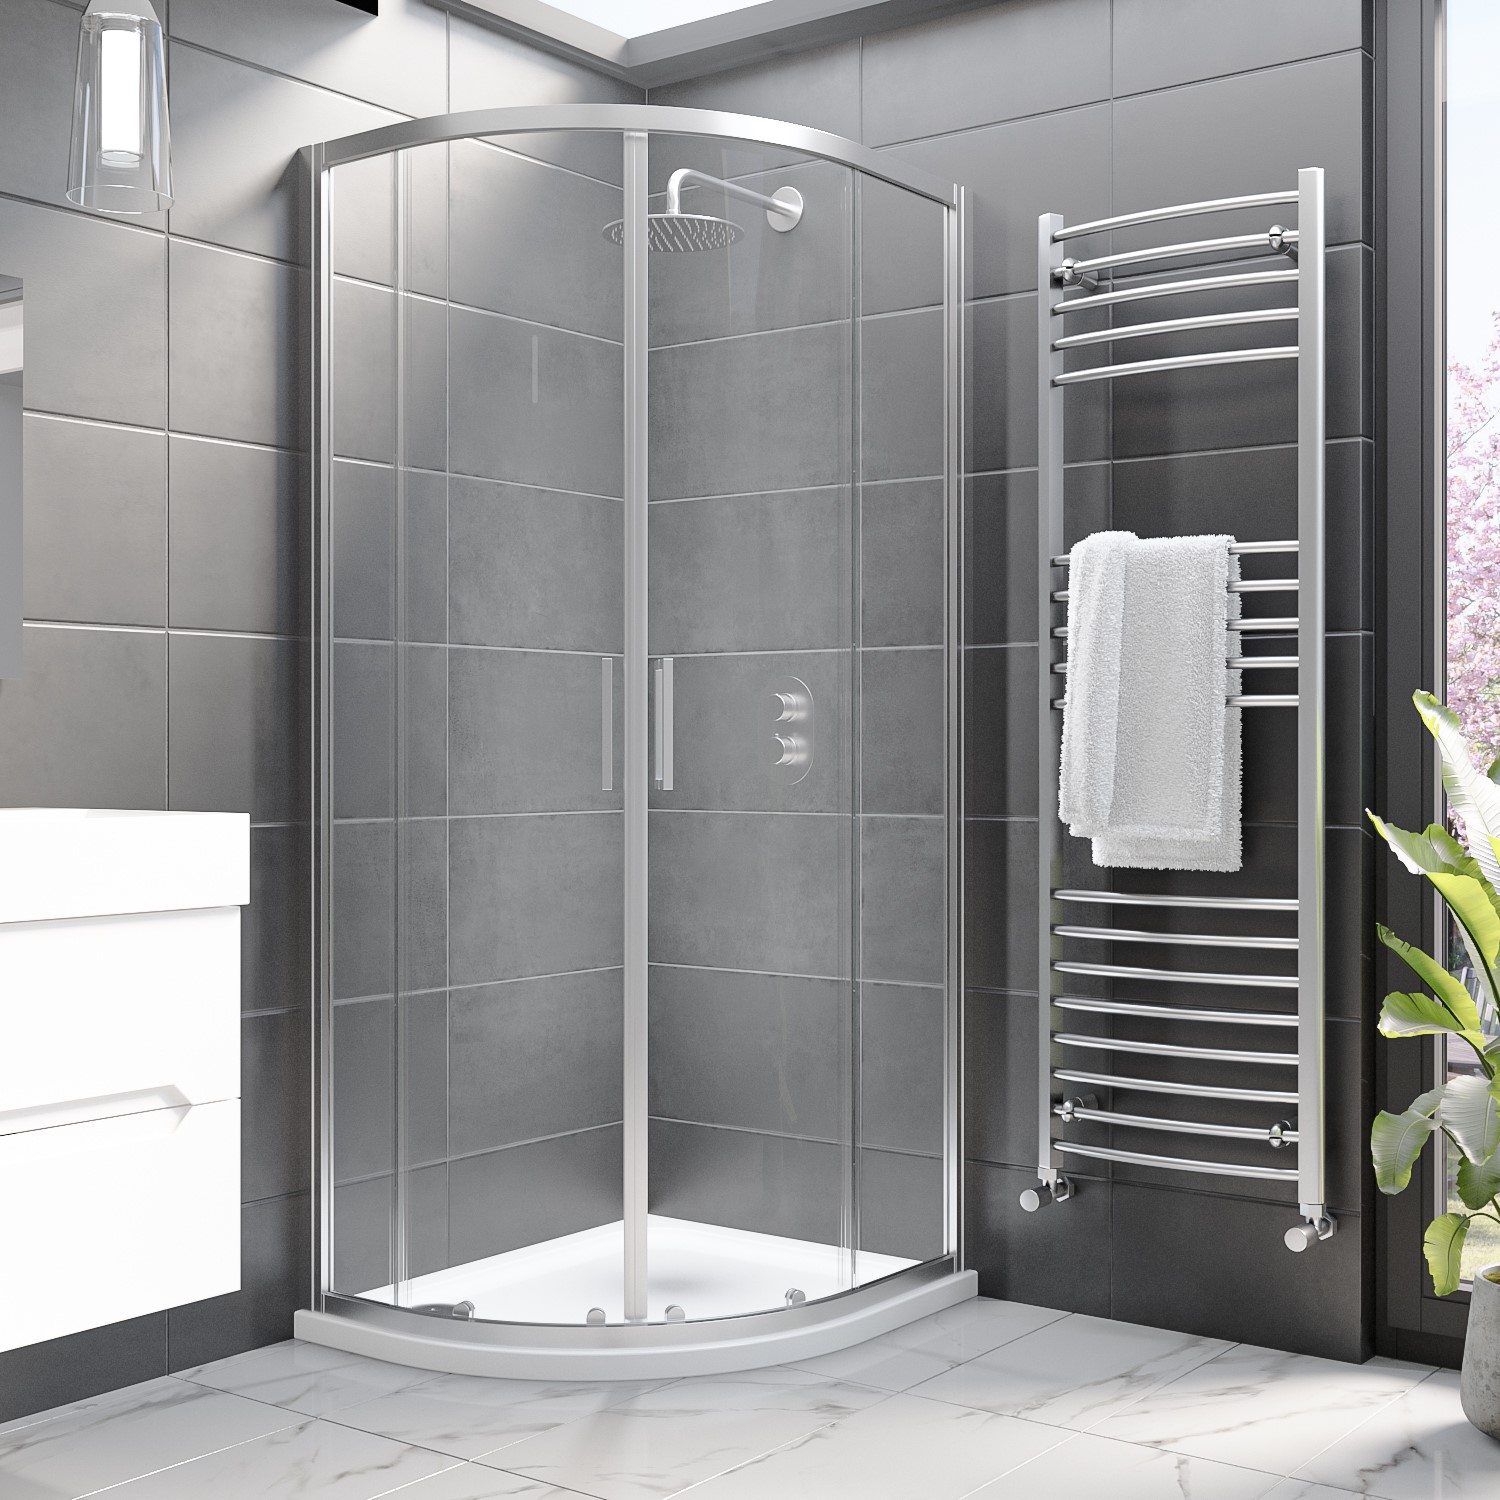 900 x 760mm Left Hand Offset Quadrant Shower Enclosure with Tray - Pavo